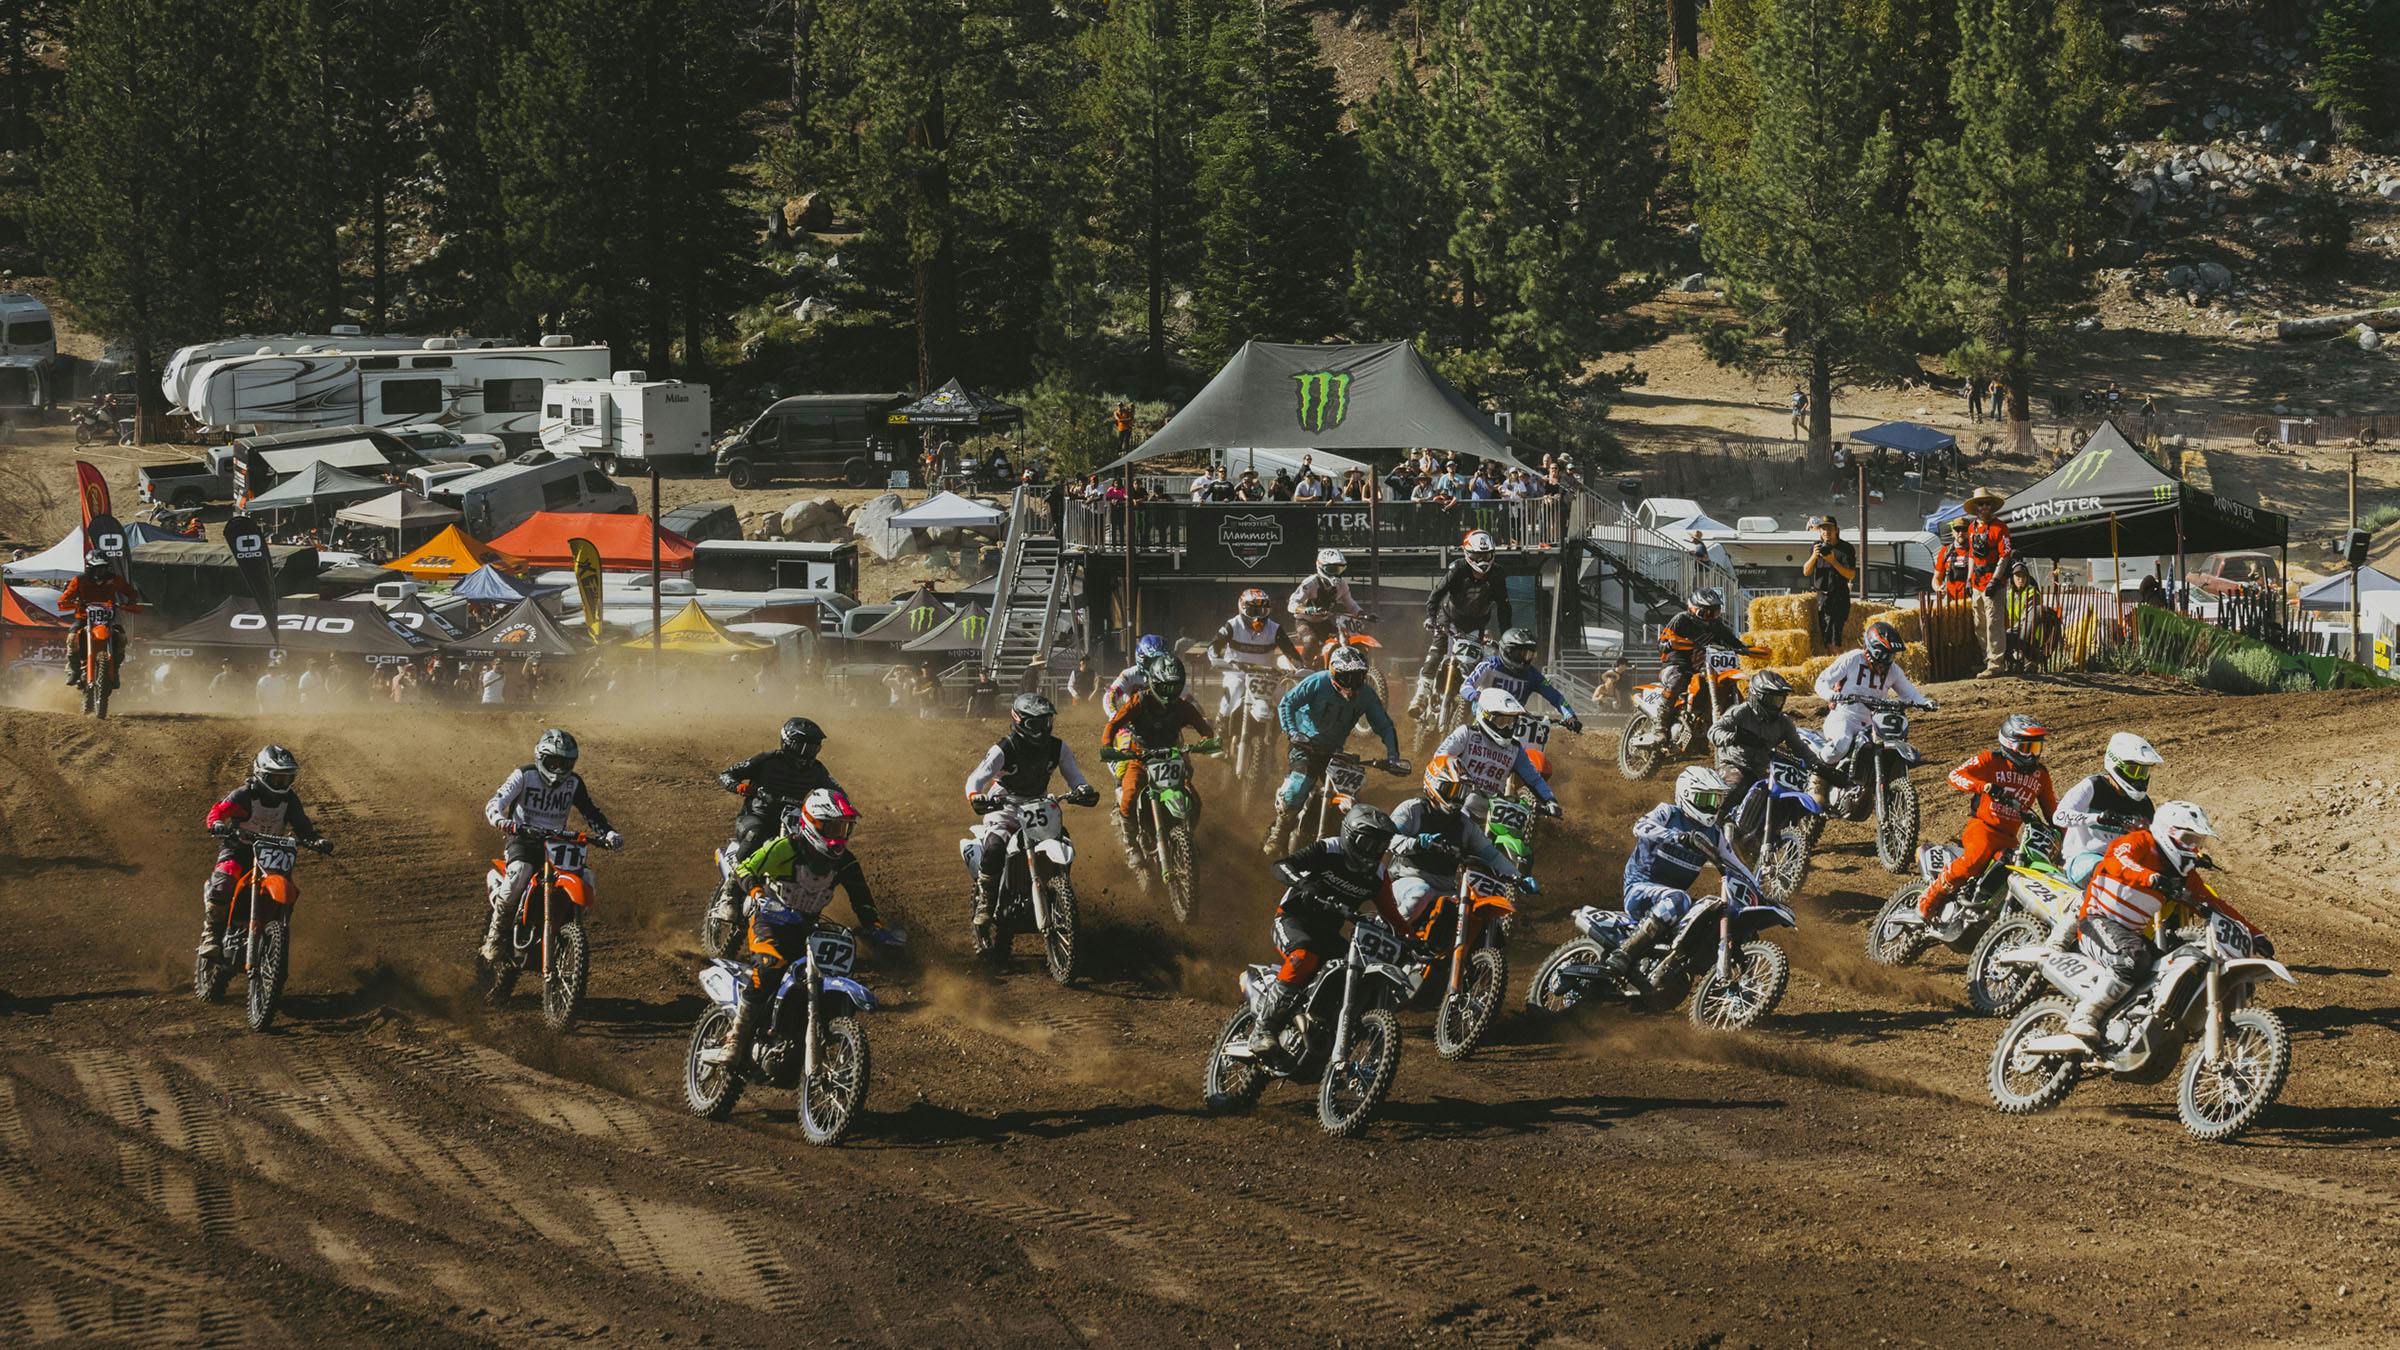 Mammoth Motocross racers on track with tents in background